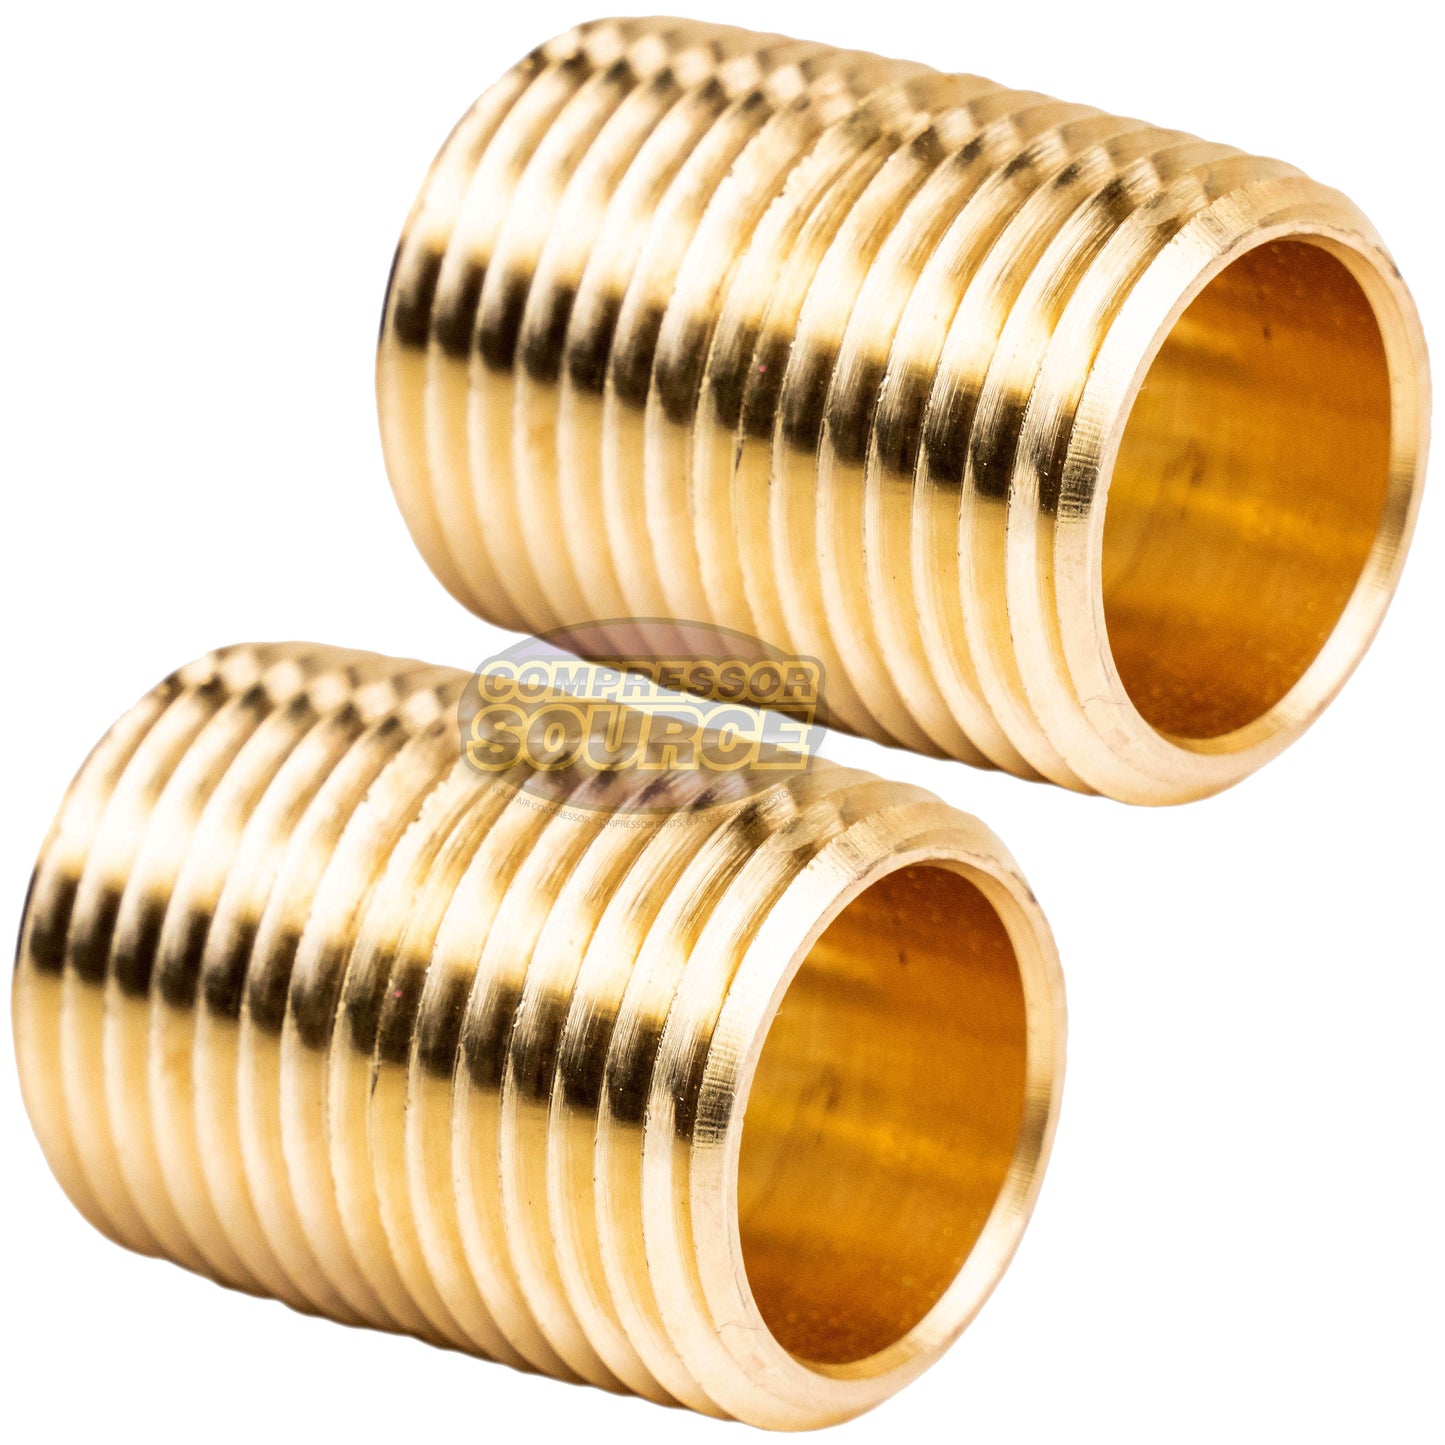 2 Pack 1/2" NPT X Male Close Pipe Nipples Threaded Brass Fitting Pipe Connector